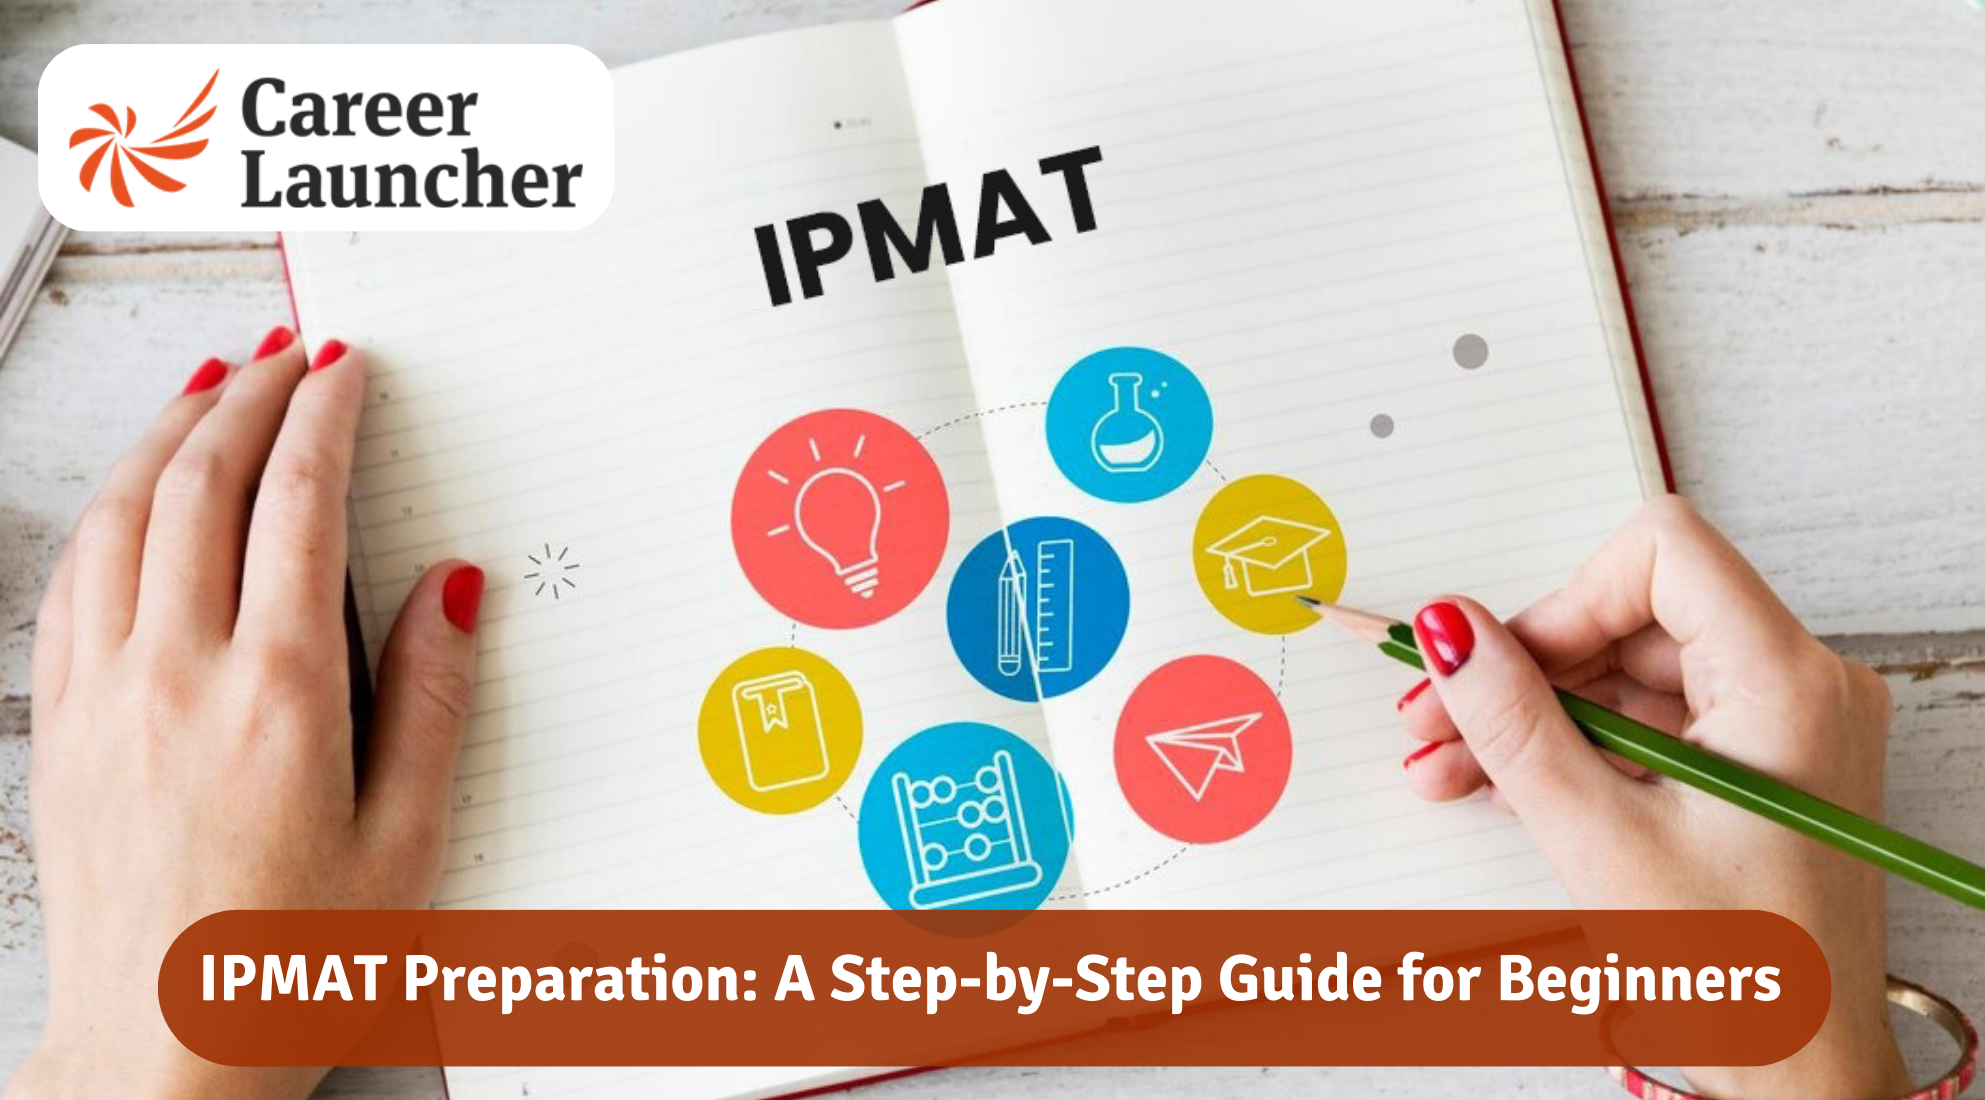 IPMAT Preparation: A Step-by-Step Guide for Beginners